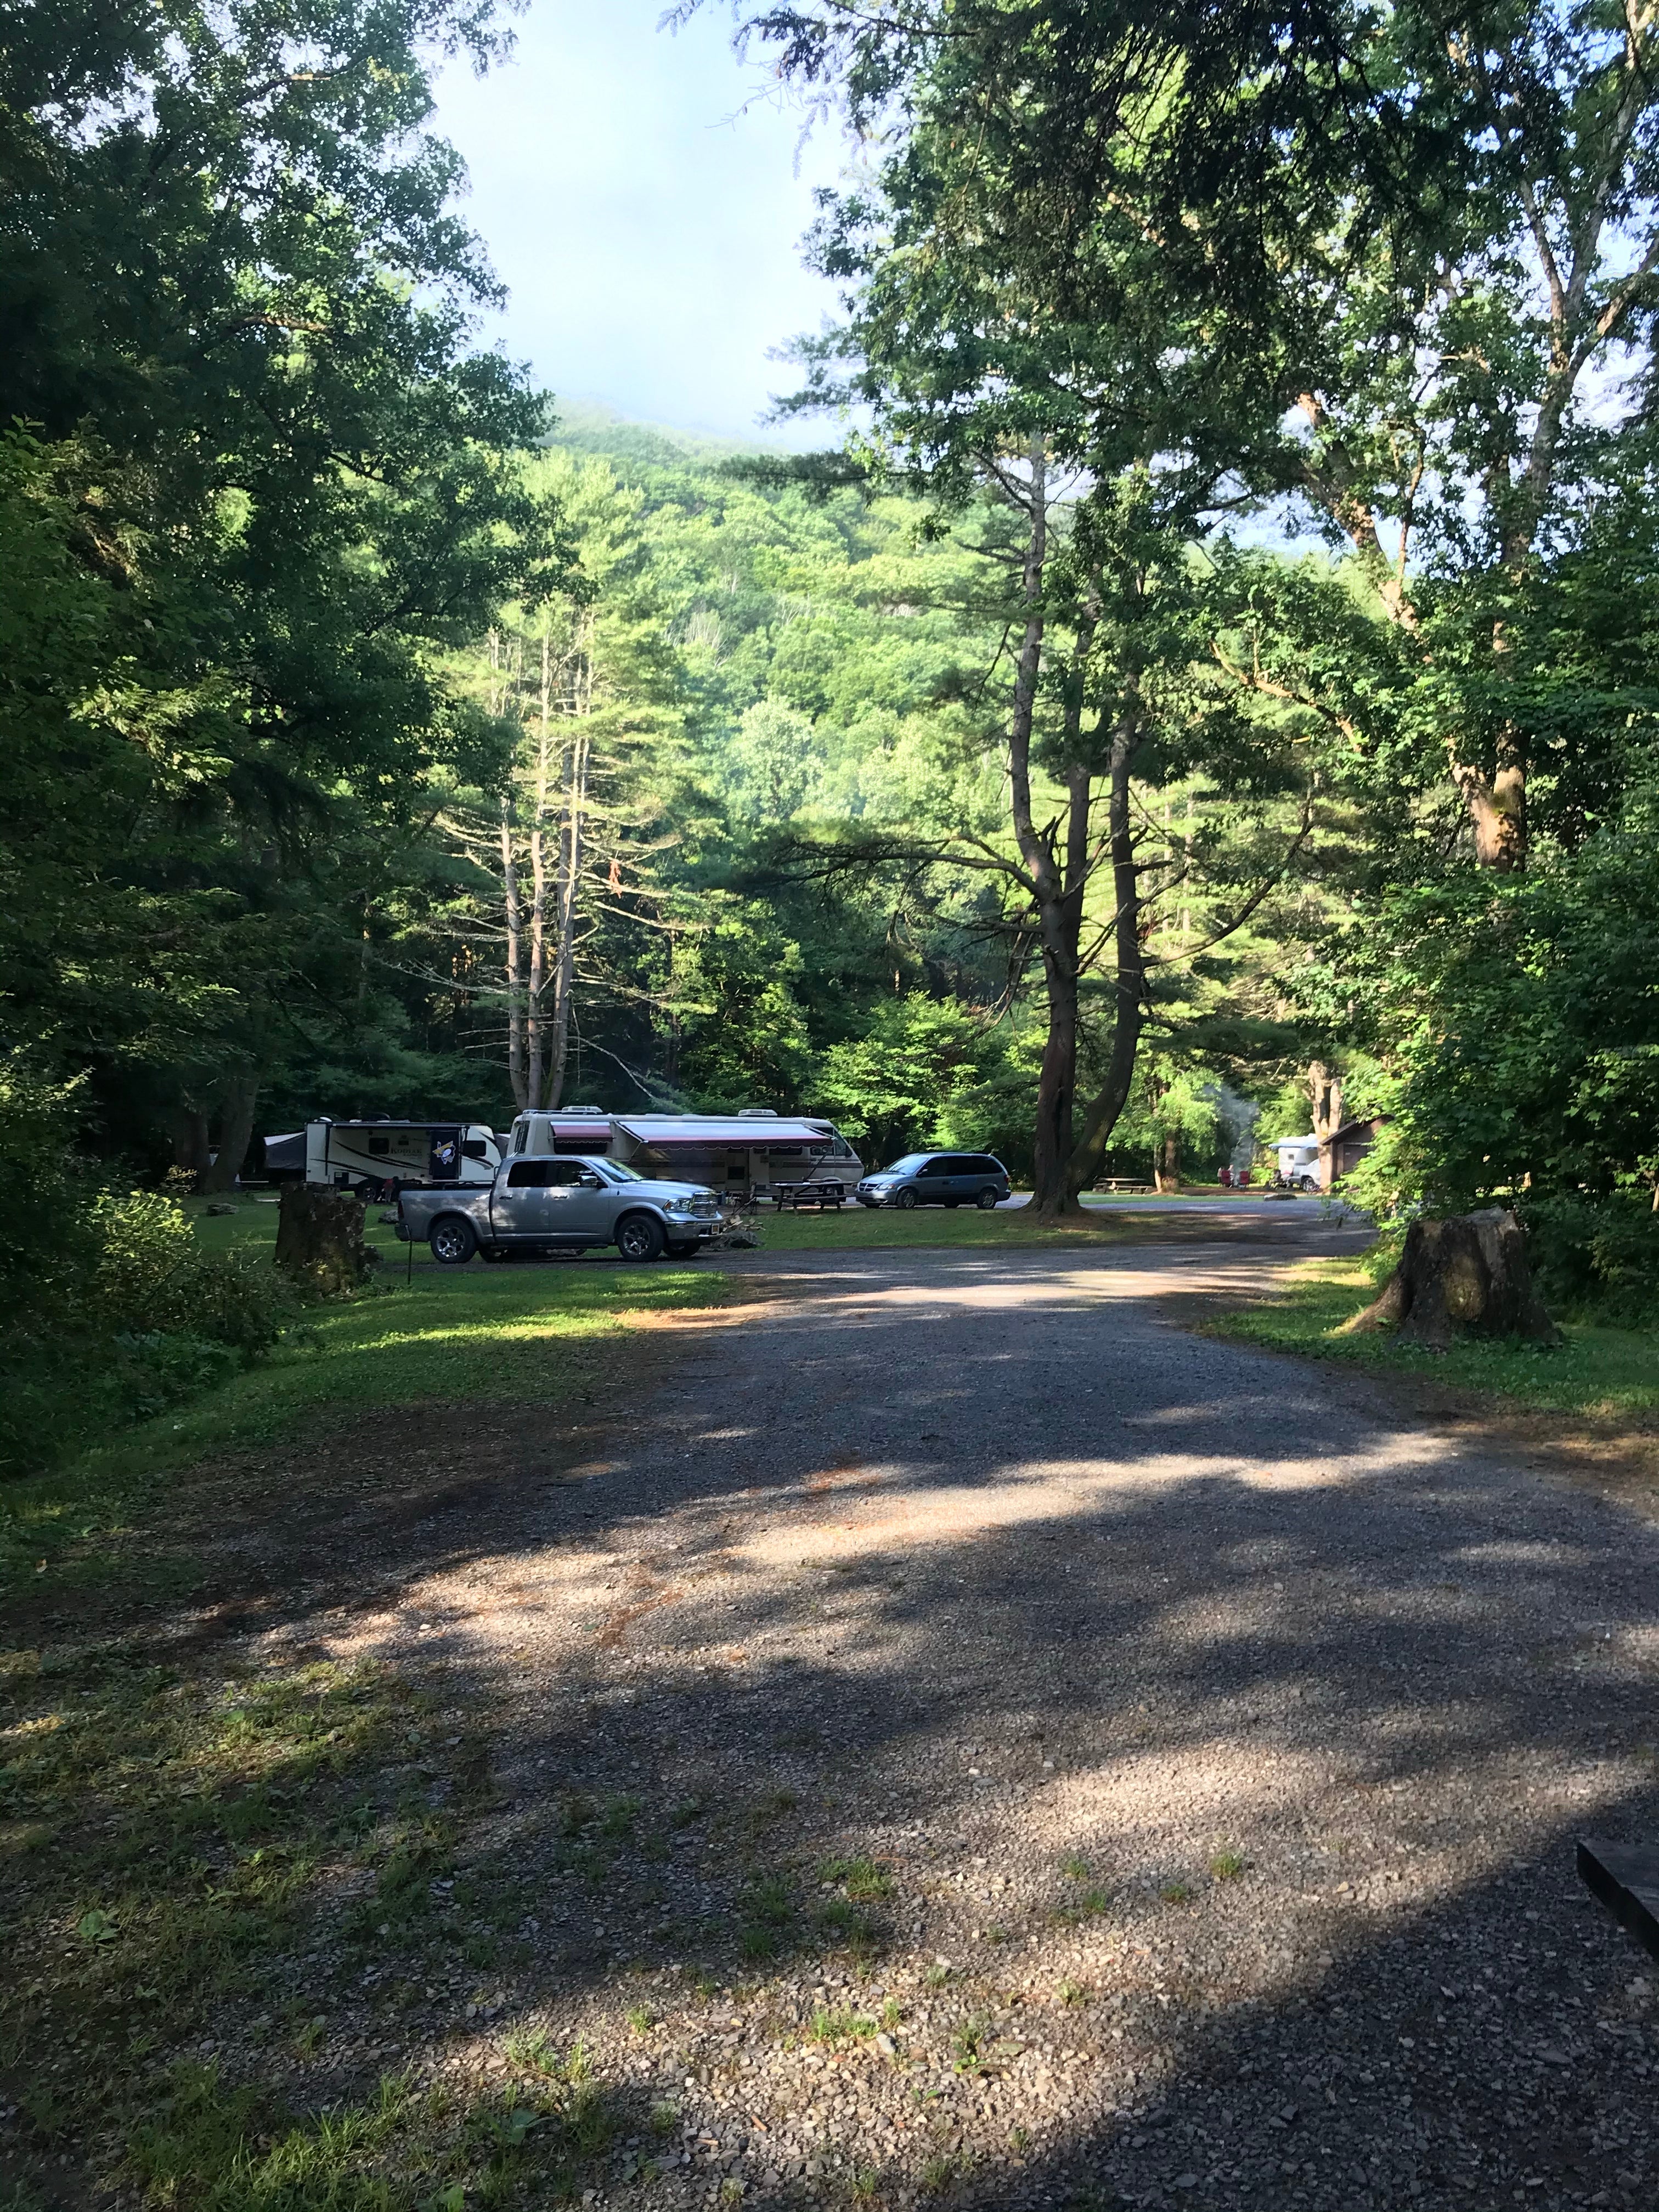 Camper submitted image from Hicks Run - 2